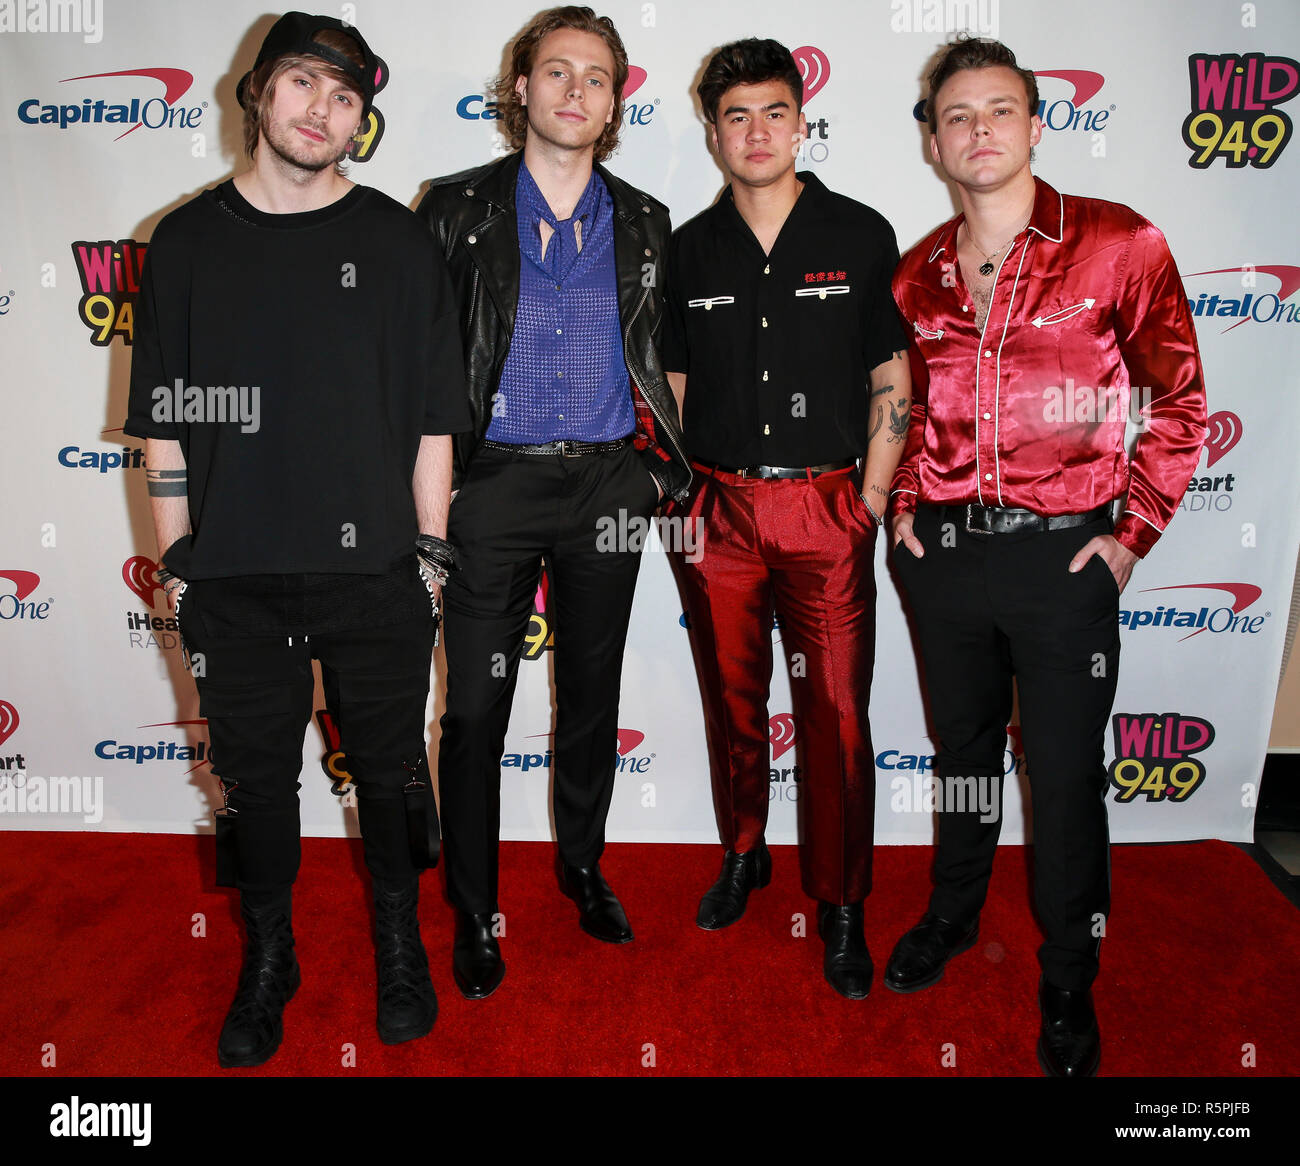 San Francisco, USA. 01st Dec, 2018. SAN FRANCISCO, CA - DEC 01: (L-R) Michael Clifford, Luke Hemmings, Calum Hood, and Ashton Irwin of 5 Seconds of Summer attend WiLD 94.9's FM's Jingle Ball 2018 Presented by Capital One at the Bill Graham Civic Auditorium on December 1, 2018 in San Francisco, California Credit: The Photo Access/Alamy Live News Stock Photo